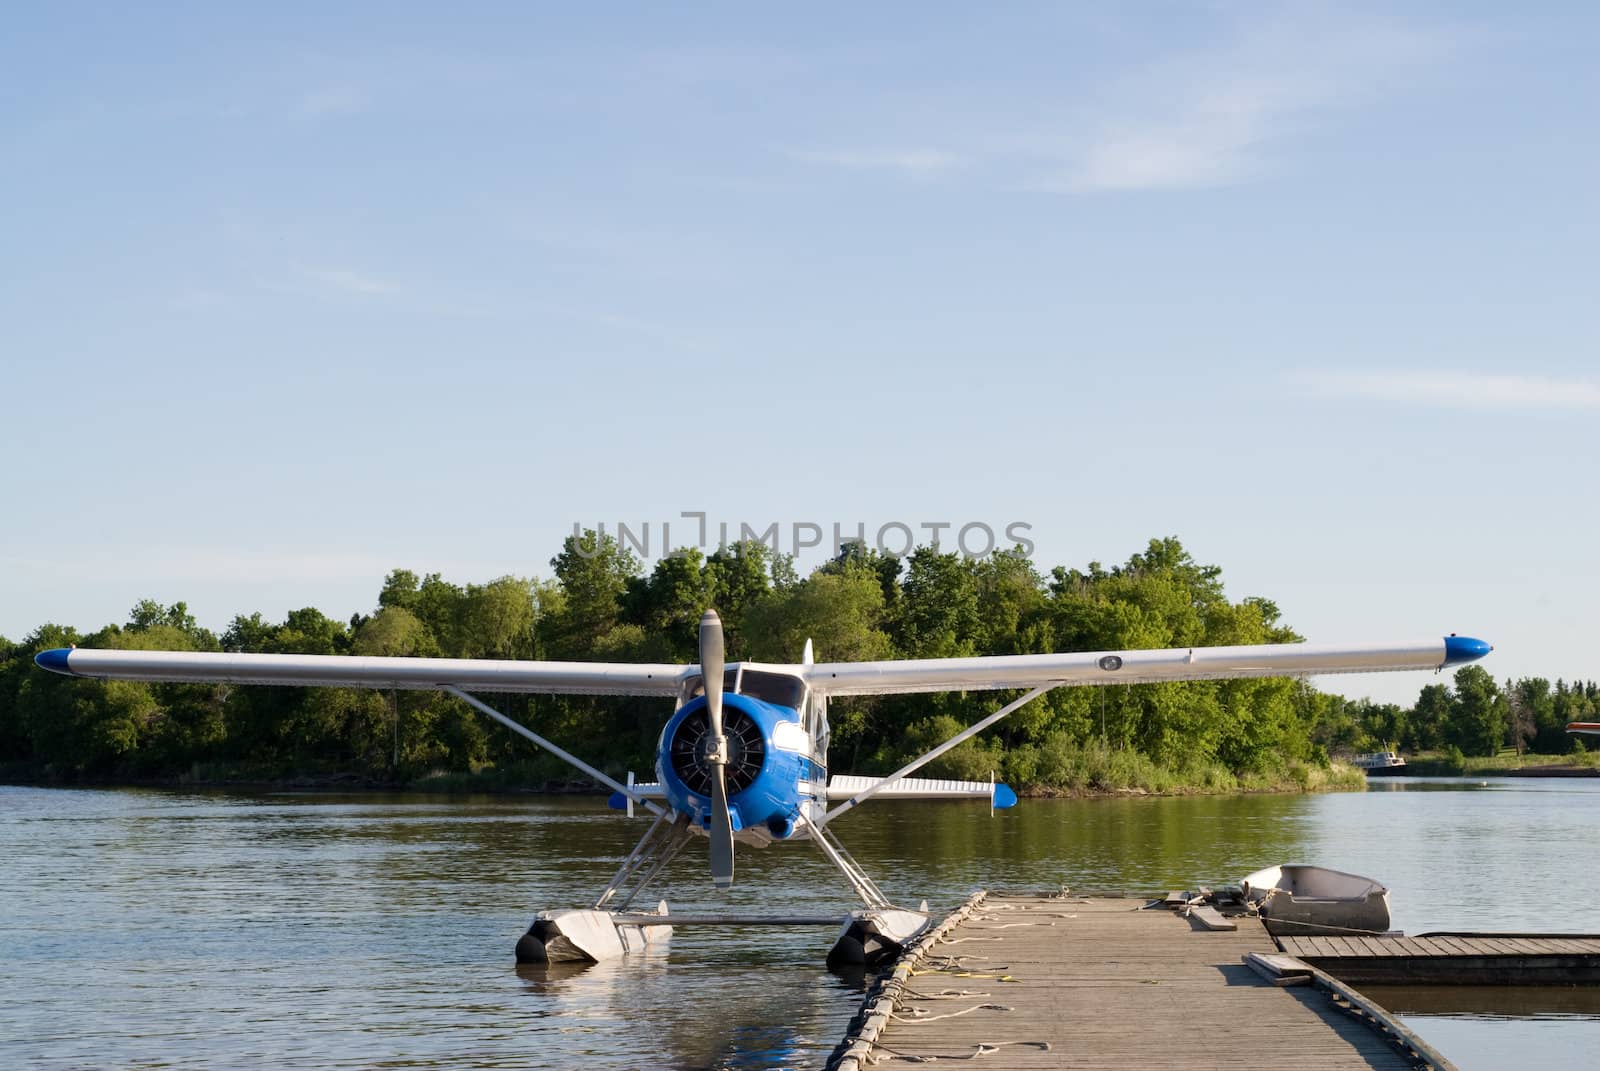 A small water plane prepared for take-off